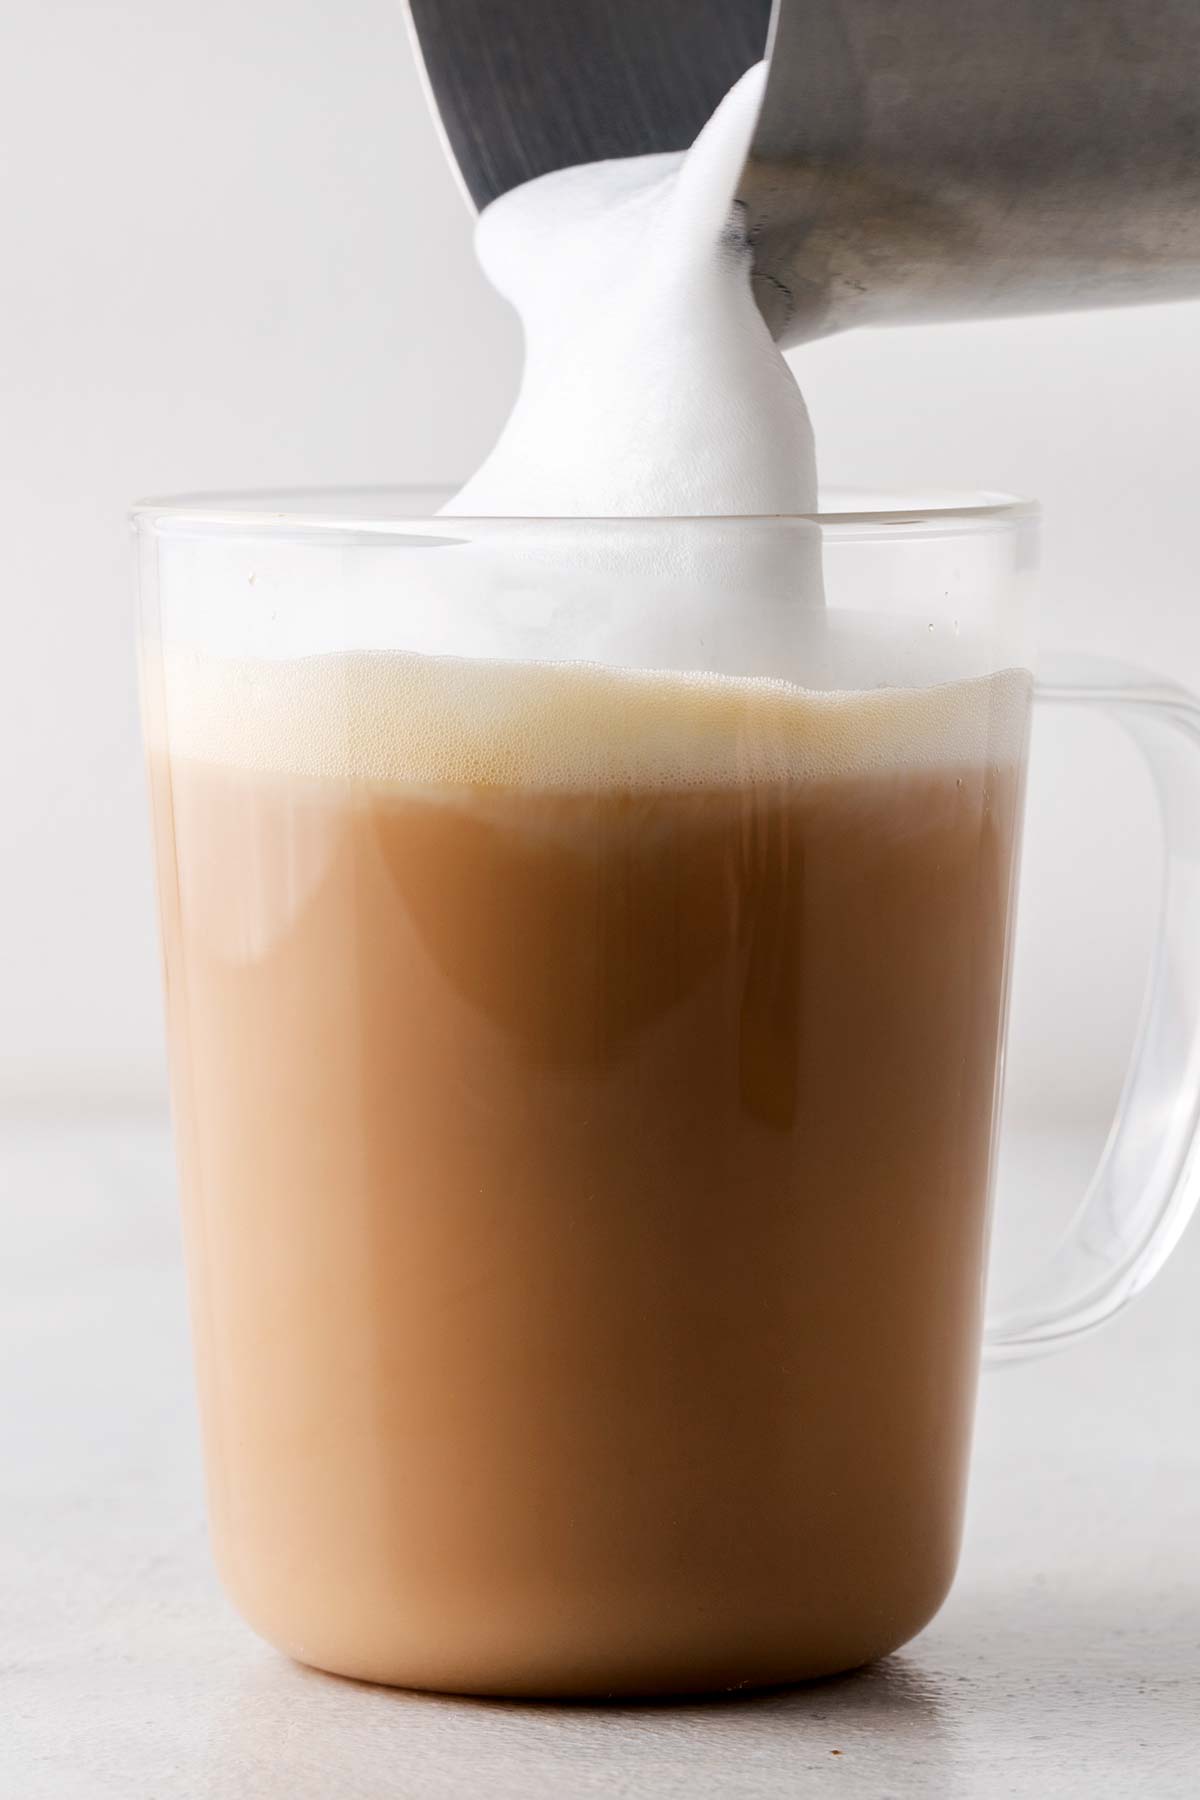 Starbucks Royal English Breakfast Tea Latte Copycat finished drink in a clear glass with the milk foam being poured on top.